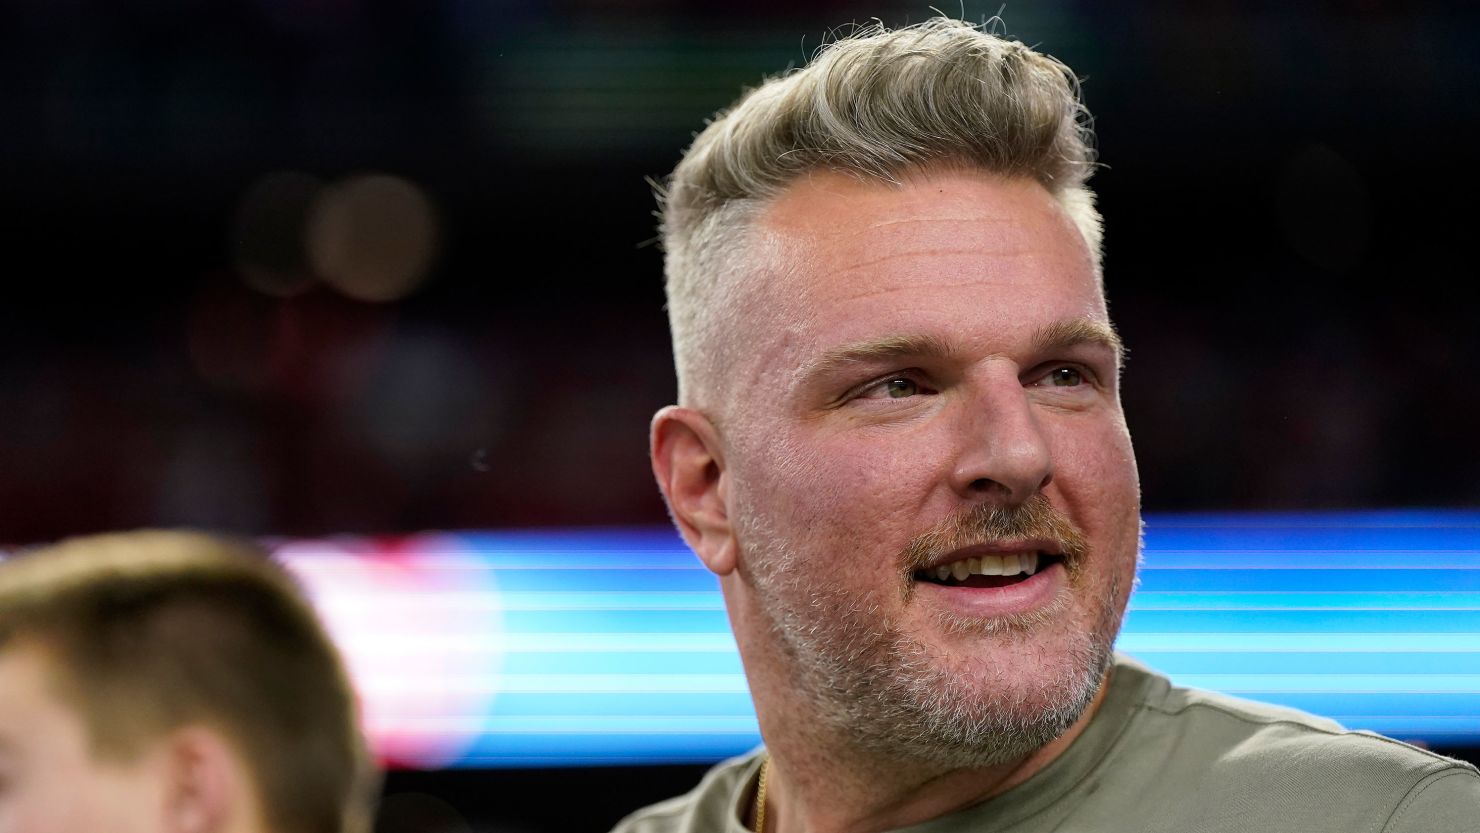 ESPN analyst Pat McAfee is seen before the Goodyear Cotton Bowl game between the Missouri Tigers and Ohio State Buckeyes at AT&T Stadium in Arlington, Texas, on December 29, 2023.